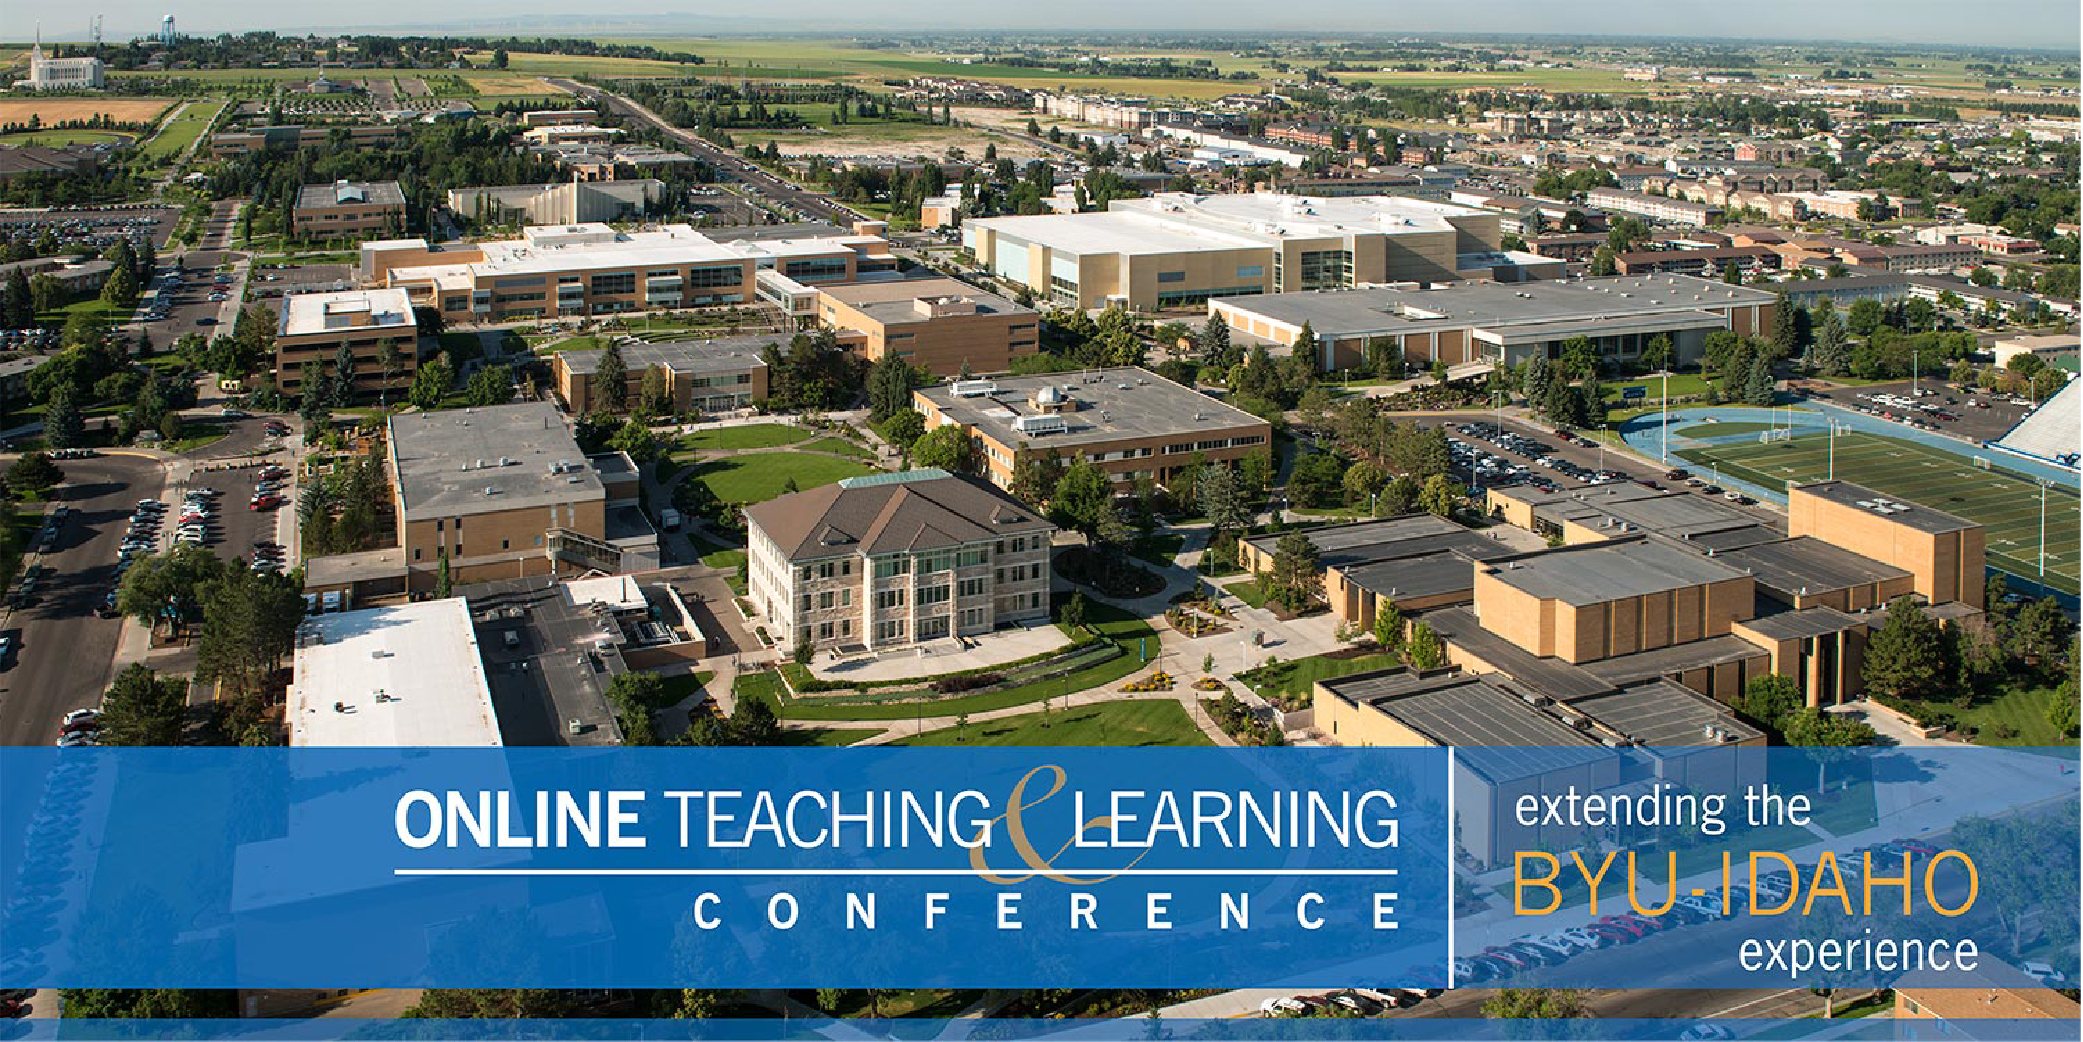 Online Learning Conference